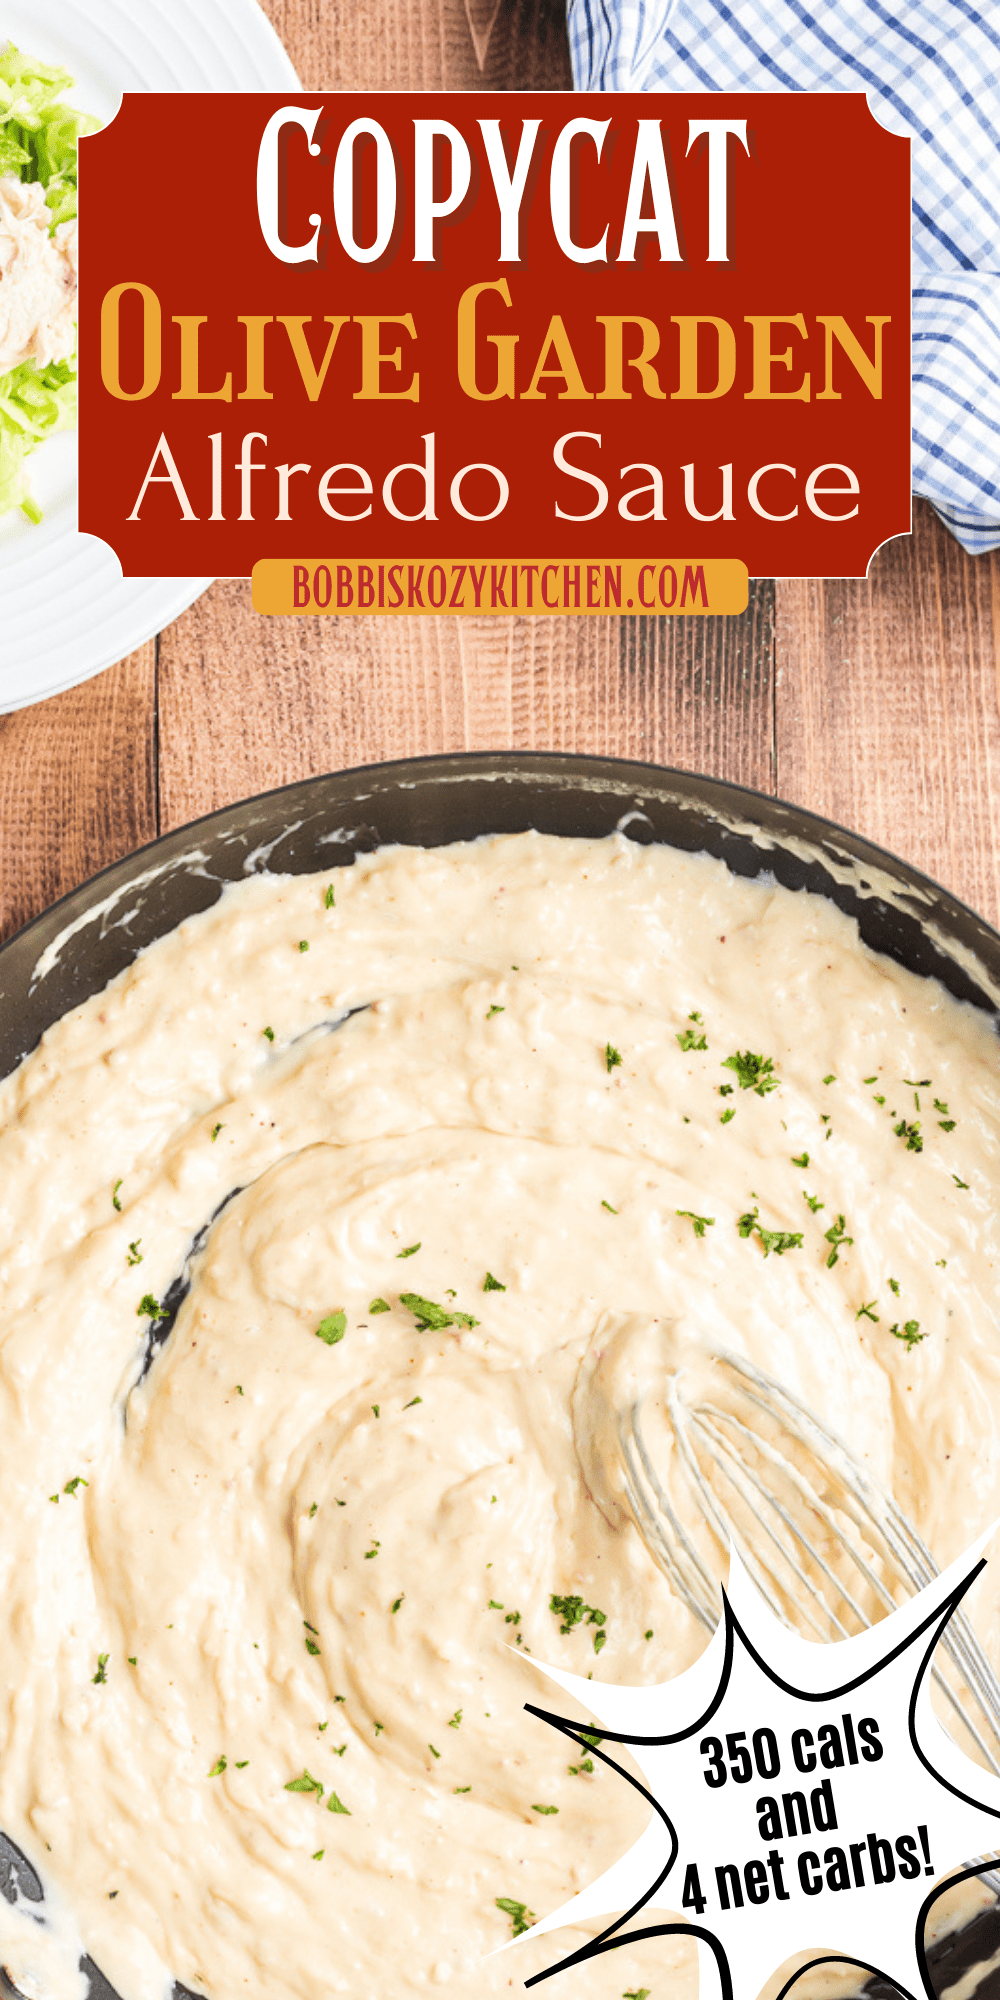 Pinterest graphic with image of Copycat Olive Garden Alfredo Sauce (Low Carb)on it.